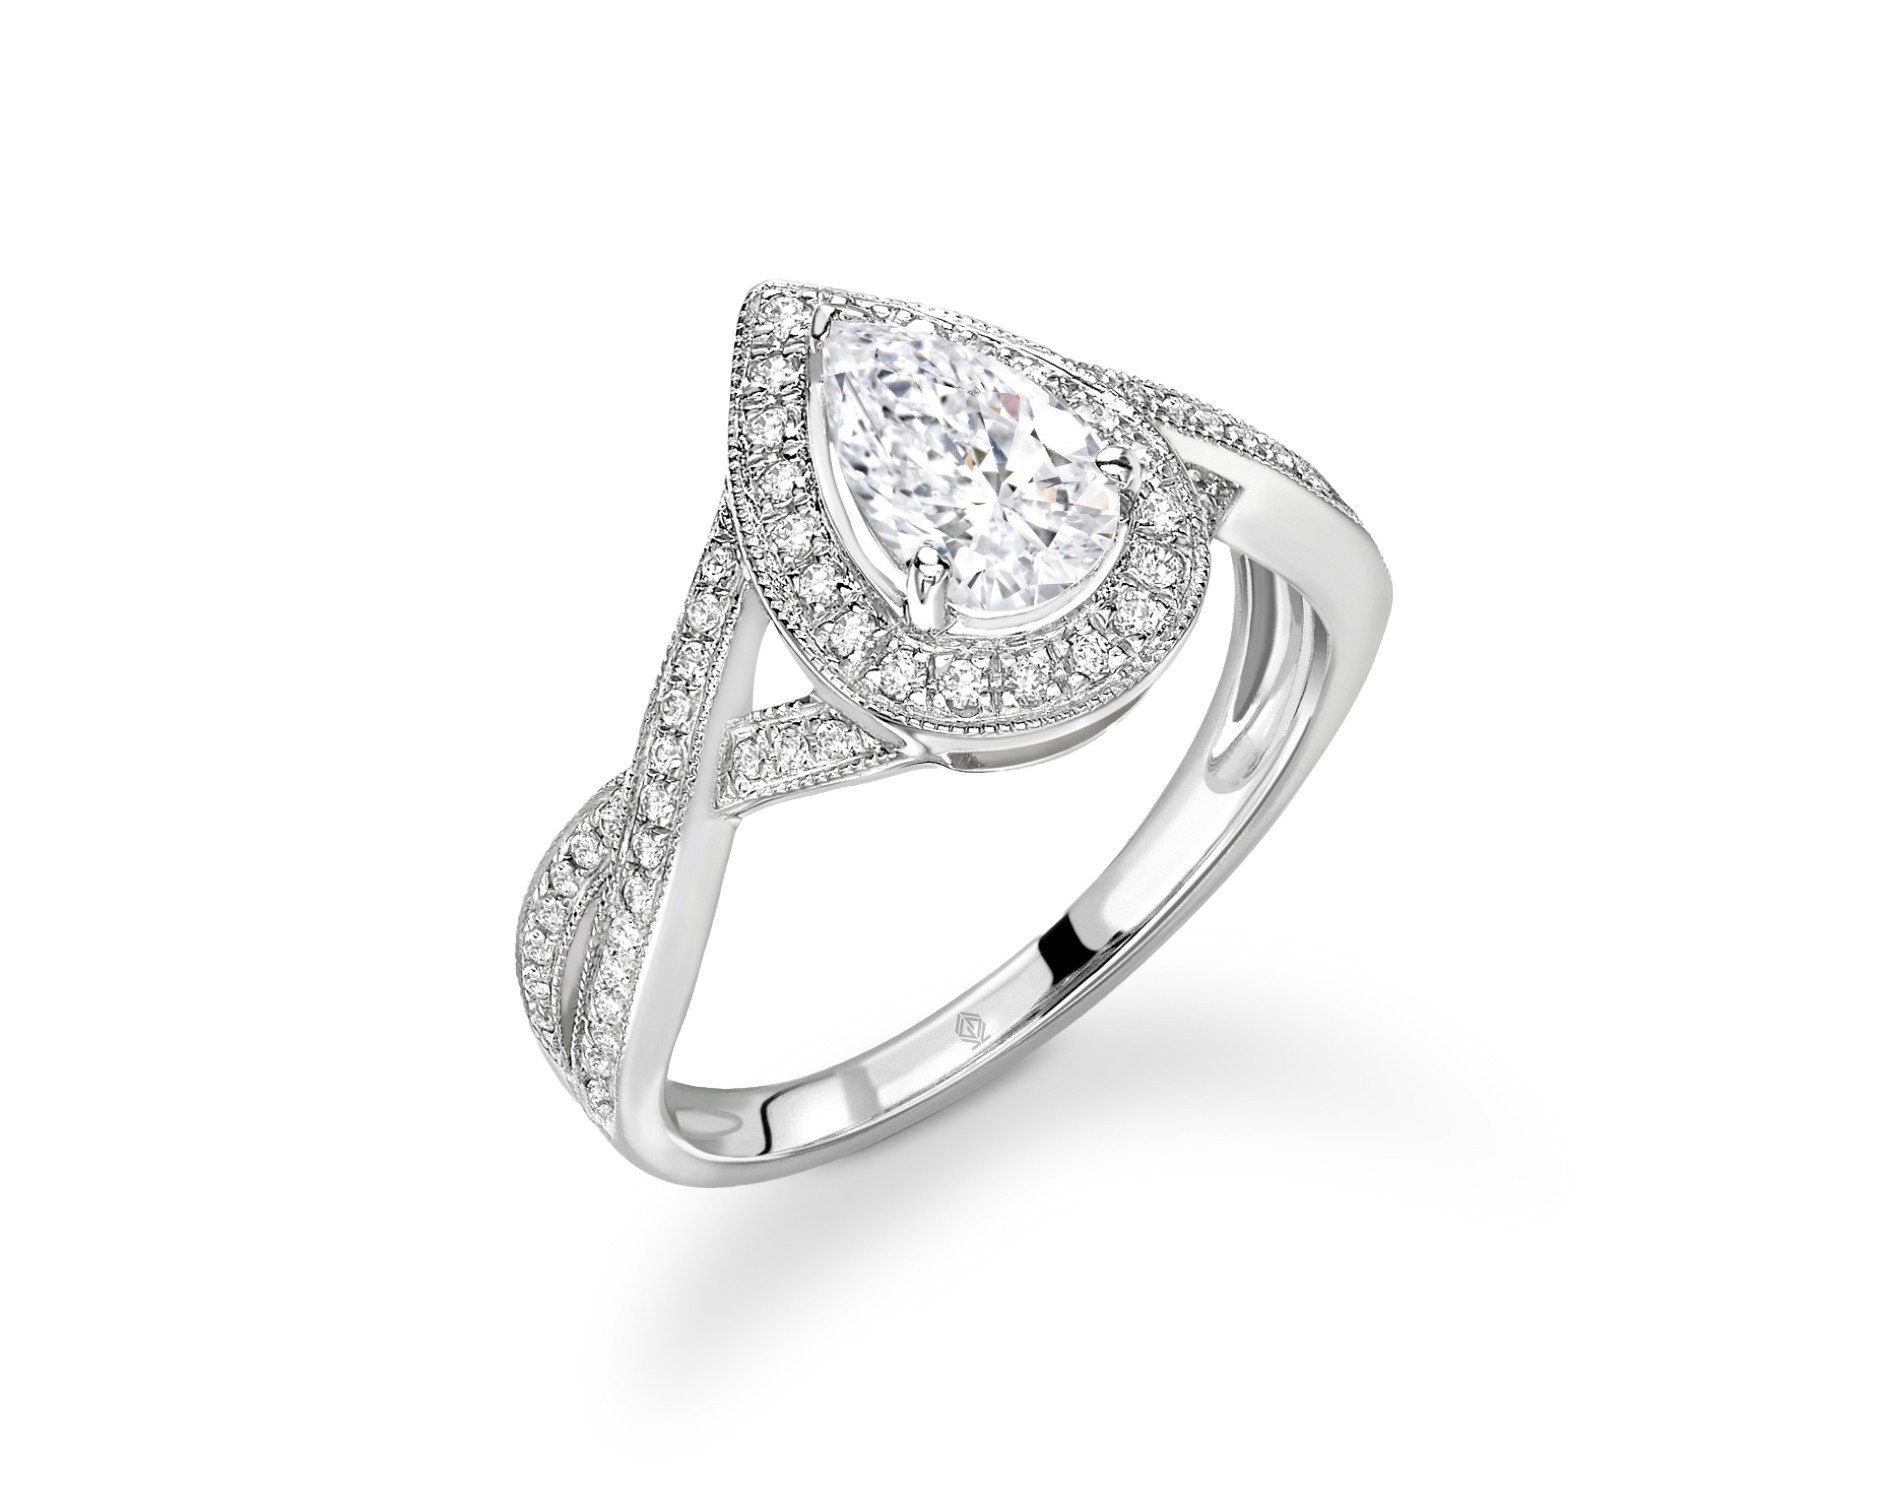 18K WHITE GOLD VINTAGE MILGRAIN HALO PEAR CUT DIAMOND RING WITH TWISTED SHANK AND SIDE STONES PAVE SET